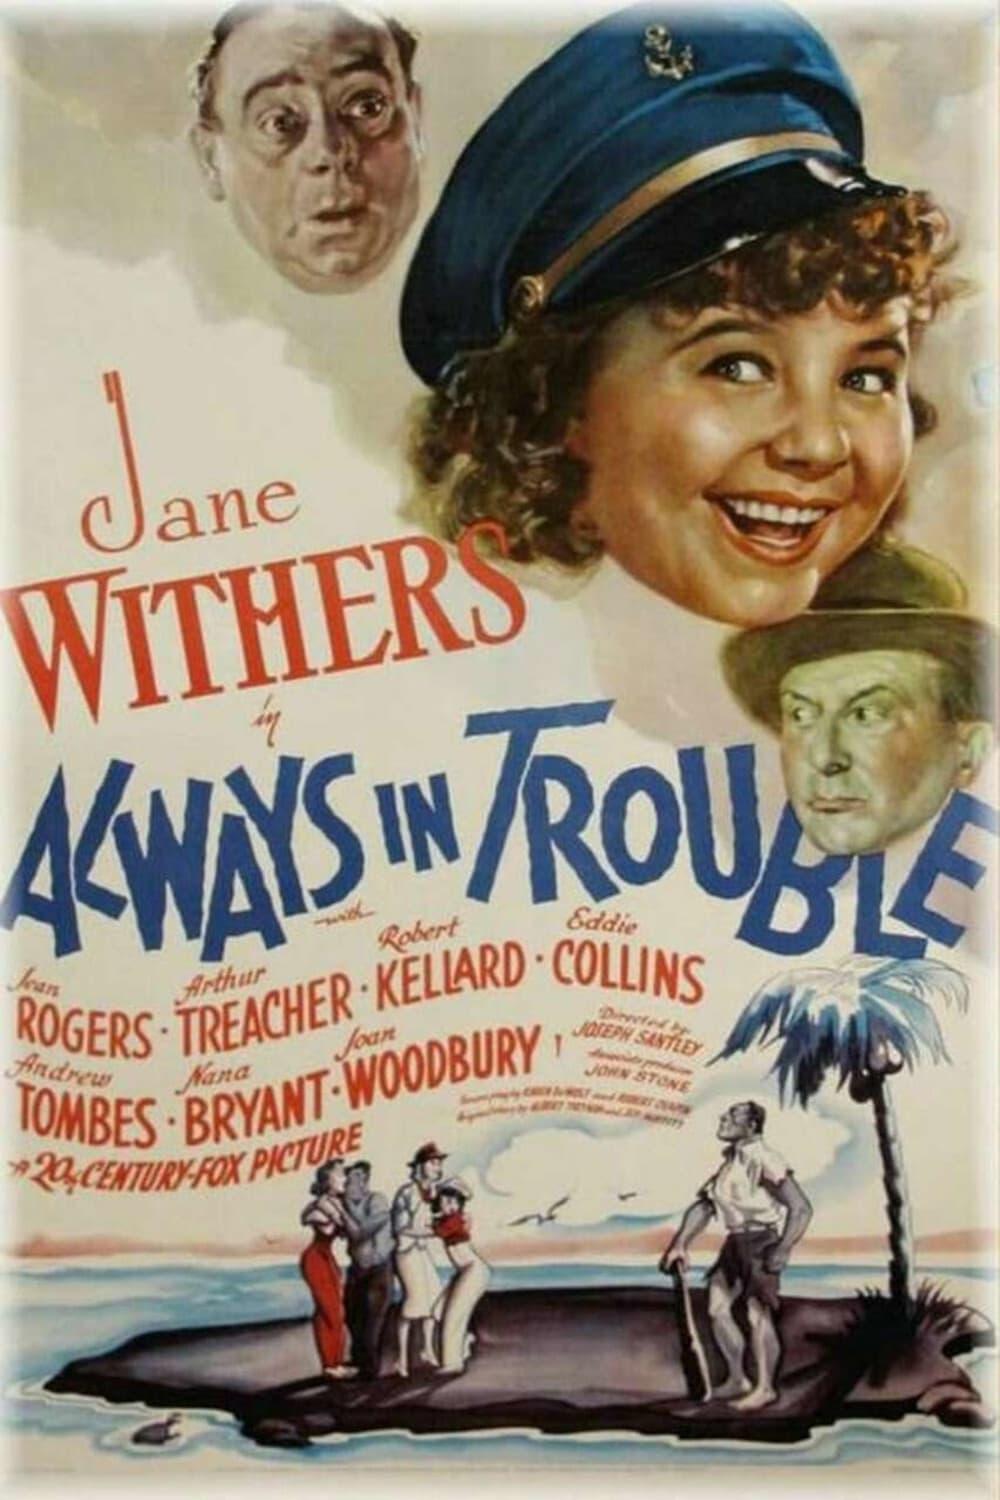 Always in Trouble poster